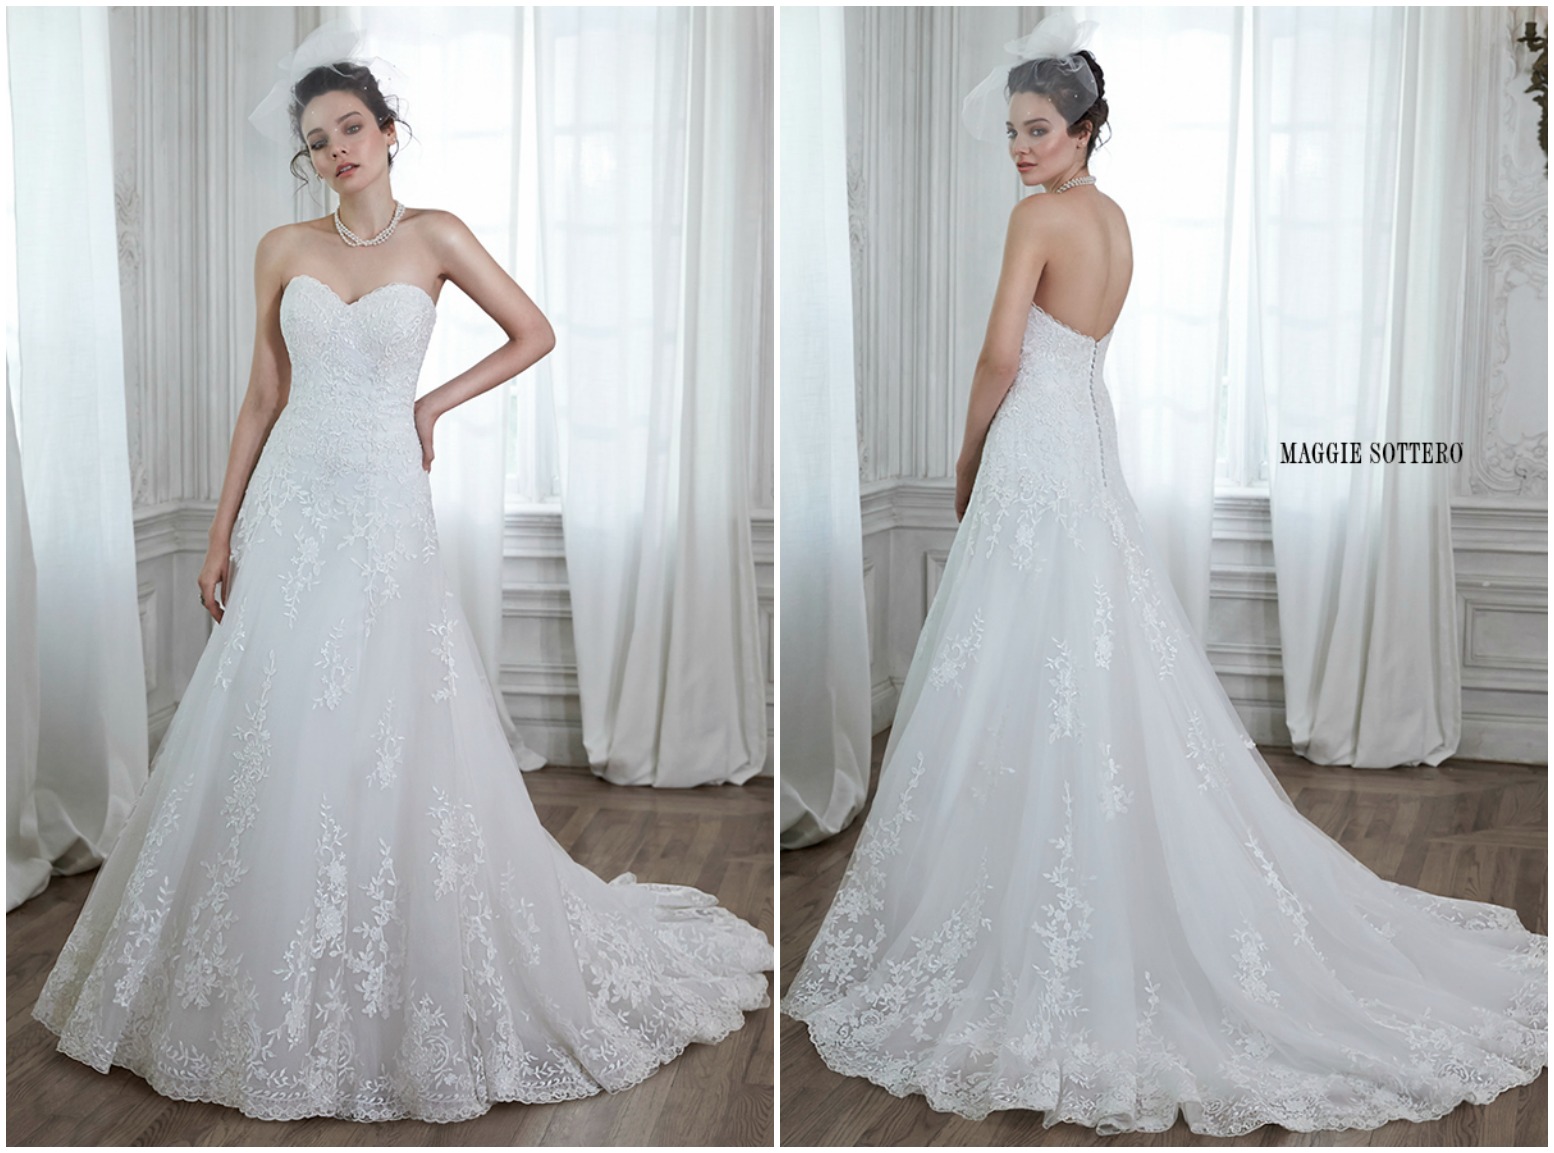 <a href="http://www.maggiesottero.com/dress.aspx?style=5MB026&amp;page=0&amp;pageSize=36&amp;keywordText=&amp;keywordType=All" target="_blank">Maggie Sottero</a>